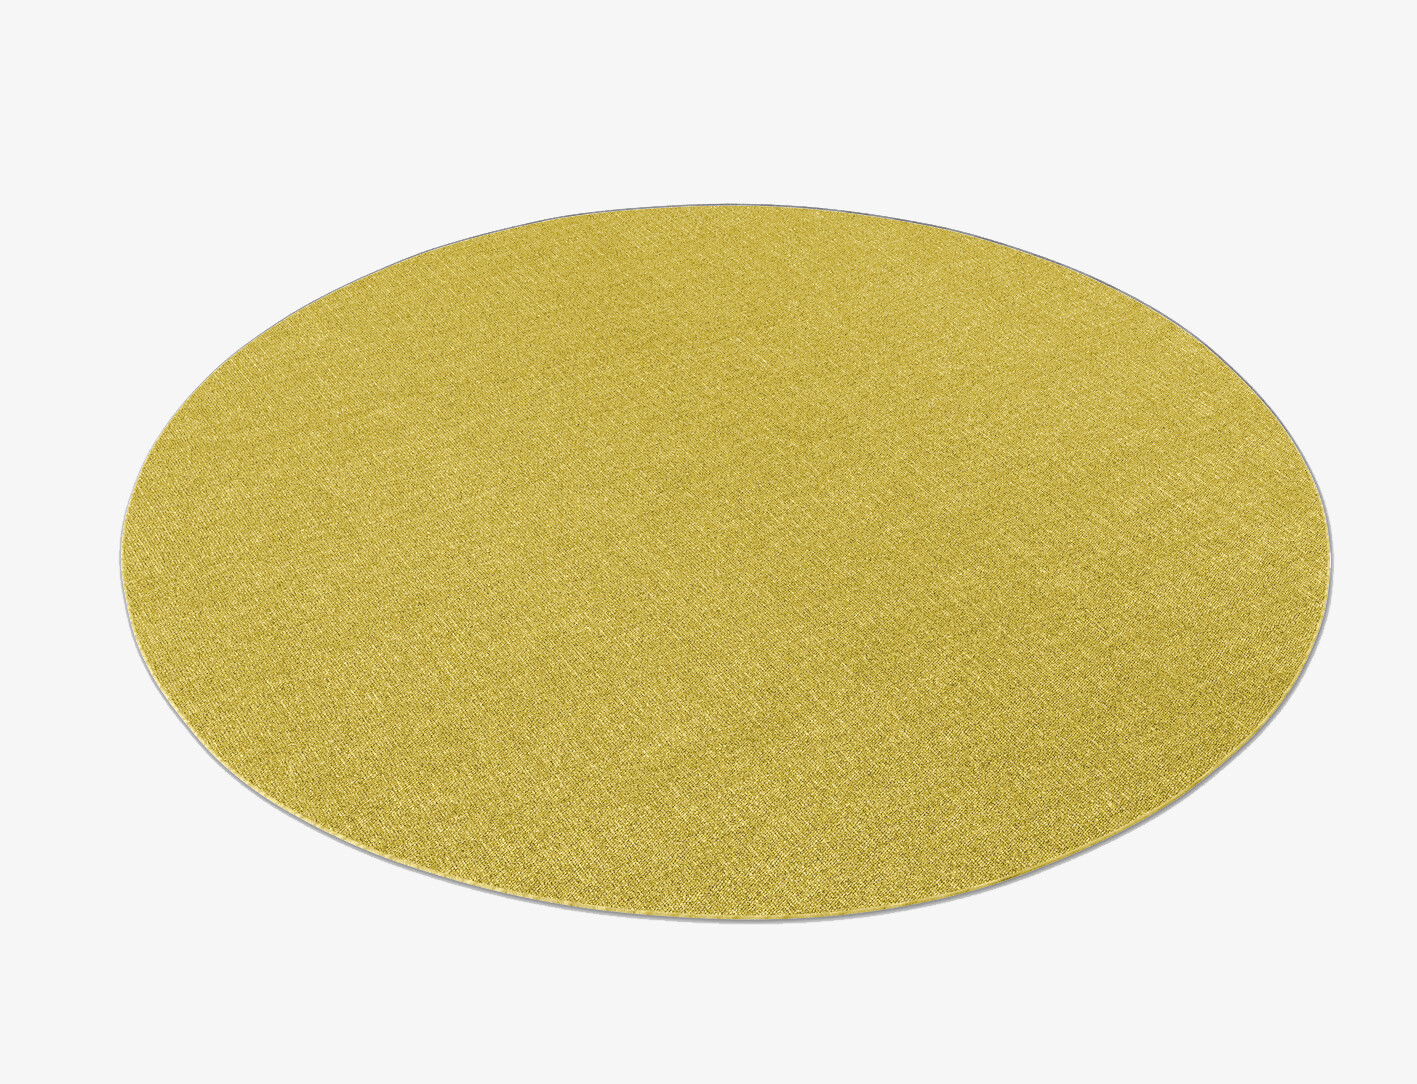 RA-DJ09 Solid Colours Round Outdoor Recycled Yarn Custom Rug by Rug Artisan